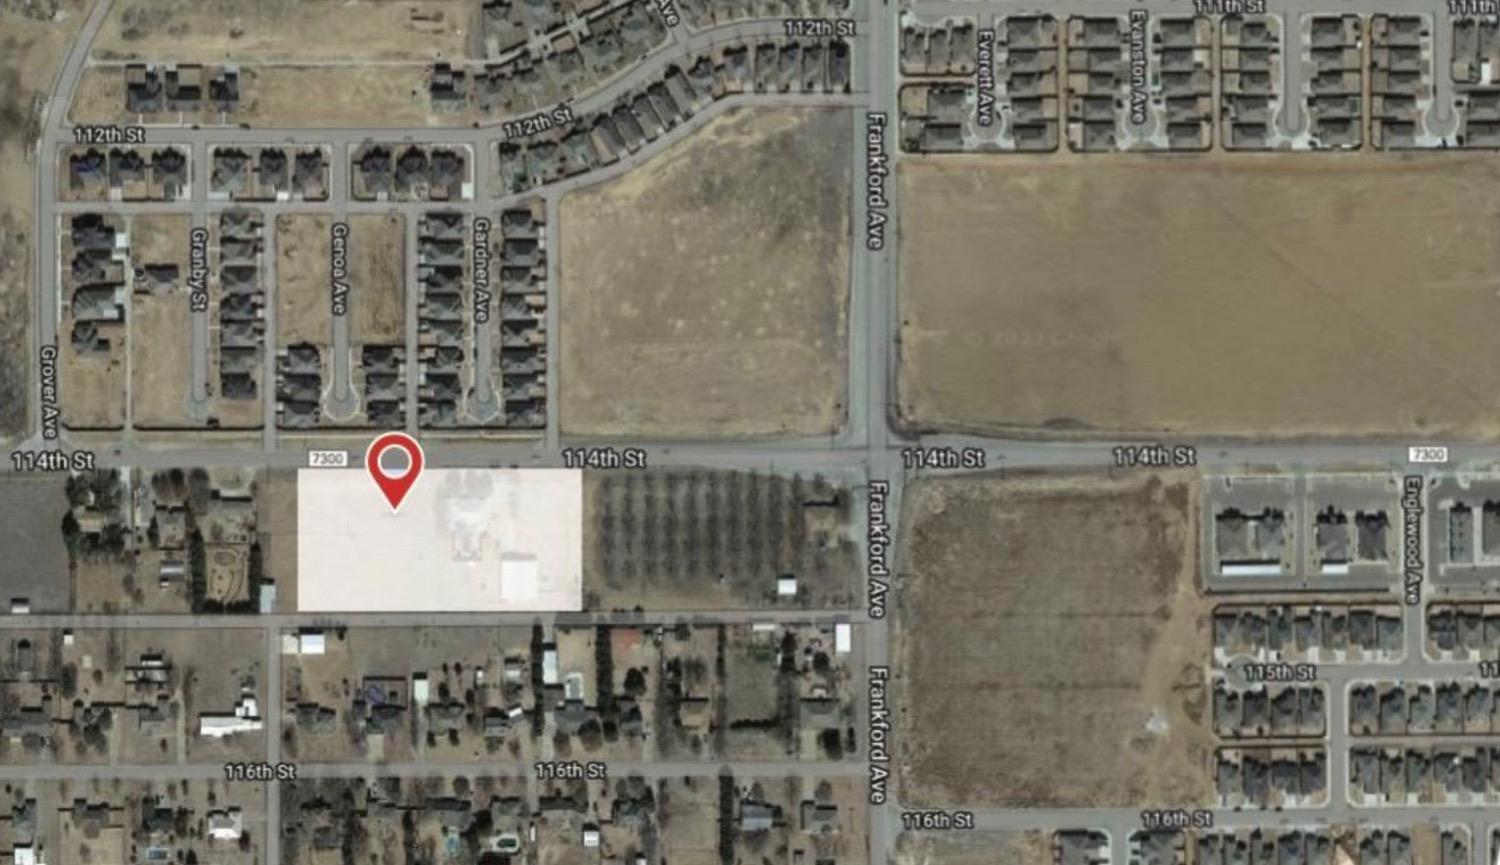 Premier Lubbock location on a 114th Street, close to the corner of Frankford!! 5 Acres makes this a prime commercial spot near a coveted hard corner. (Don't miss the chance to also look listing #202309638 at the hard corner which could be combined with this property to make it over 8.5 acres.) This property is now available for purchase at the exceptional price of $3.5 million. Situated in a bustling and highly visible area, this property offers immense potential for businesses seeking a strategic location with easy access and high traffic flow. With its attractive price point and unbeatable location, this commercial property presents an incredible investment opportunity for entrepreneurs looking to establish or expand their presence in a thriving market. Don't miss the chance to secure this sought-after property and unlock its full potential for your business endeavors. Contact us today for more information. This property has a home on the land & can be re-zone commercial.